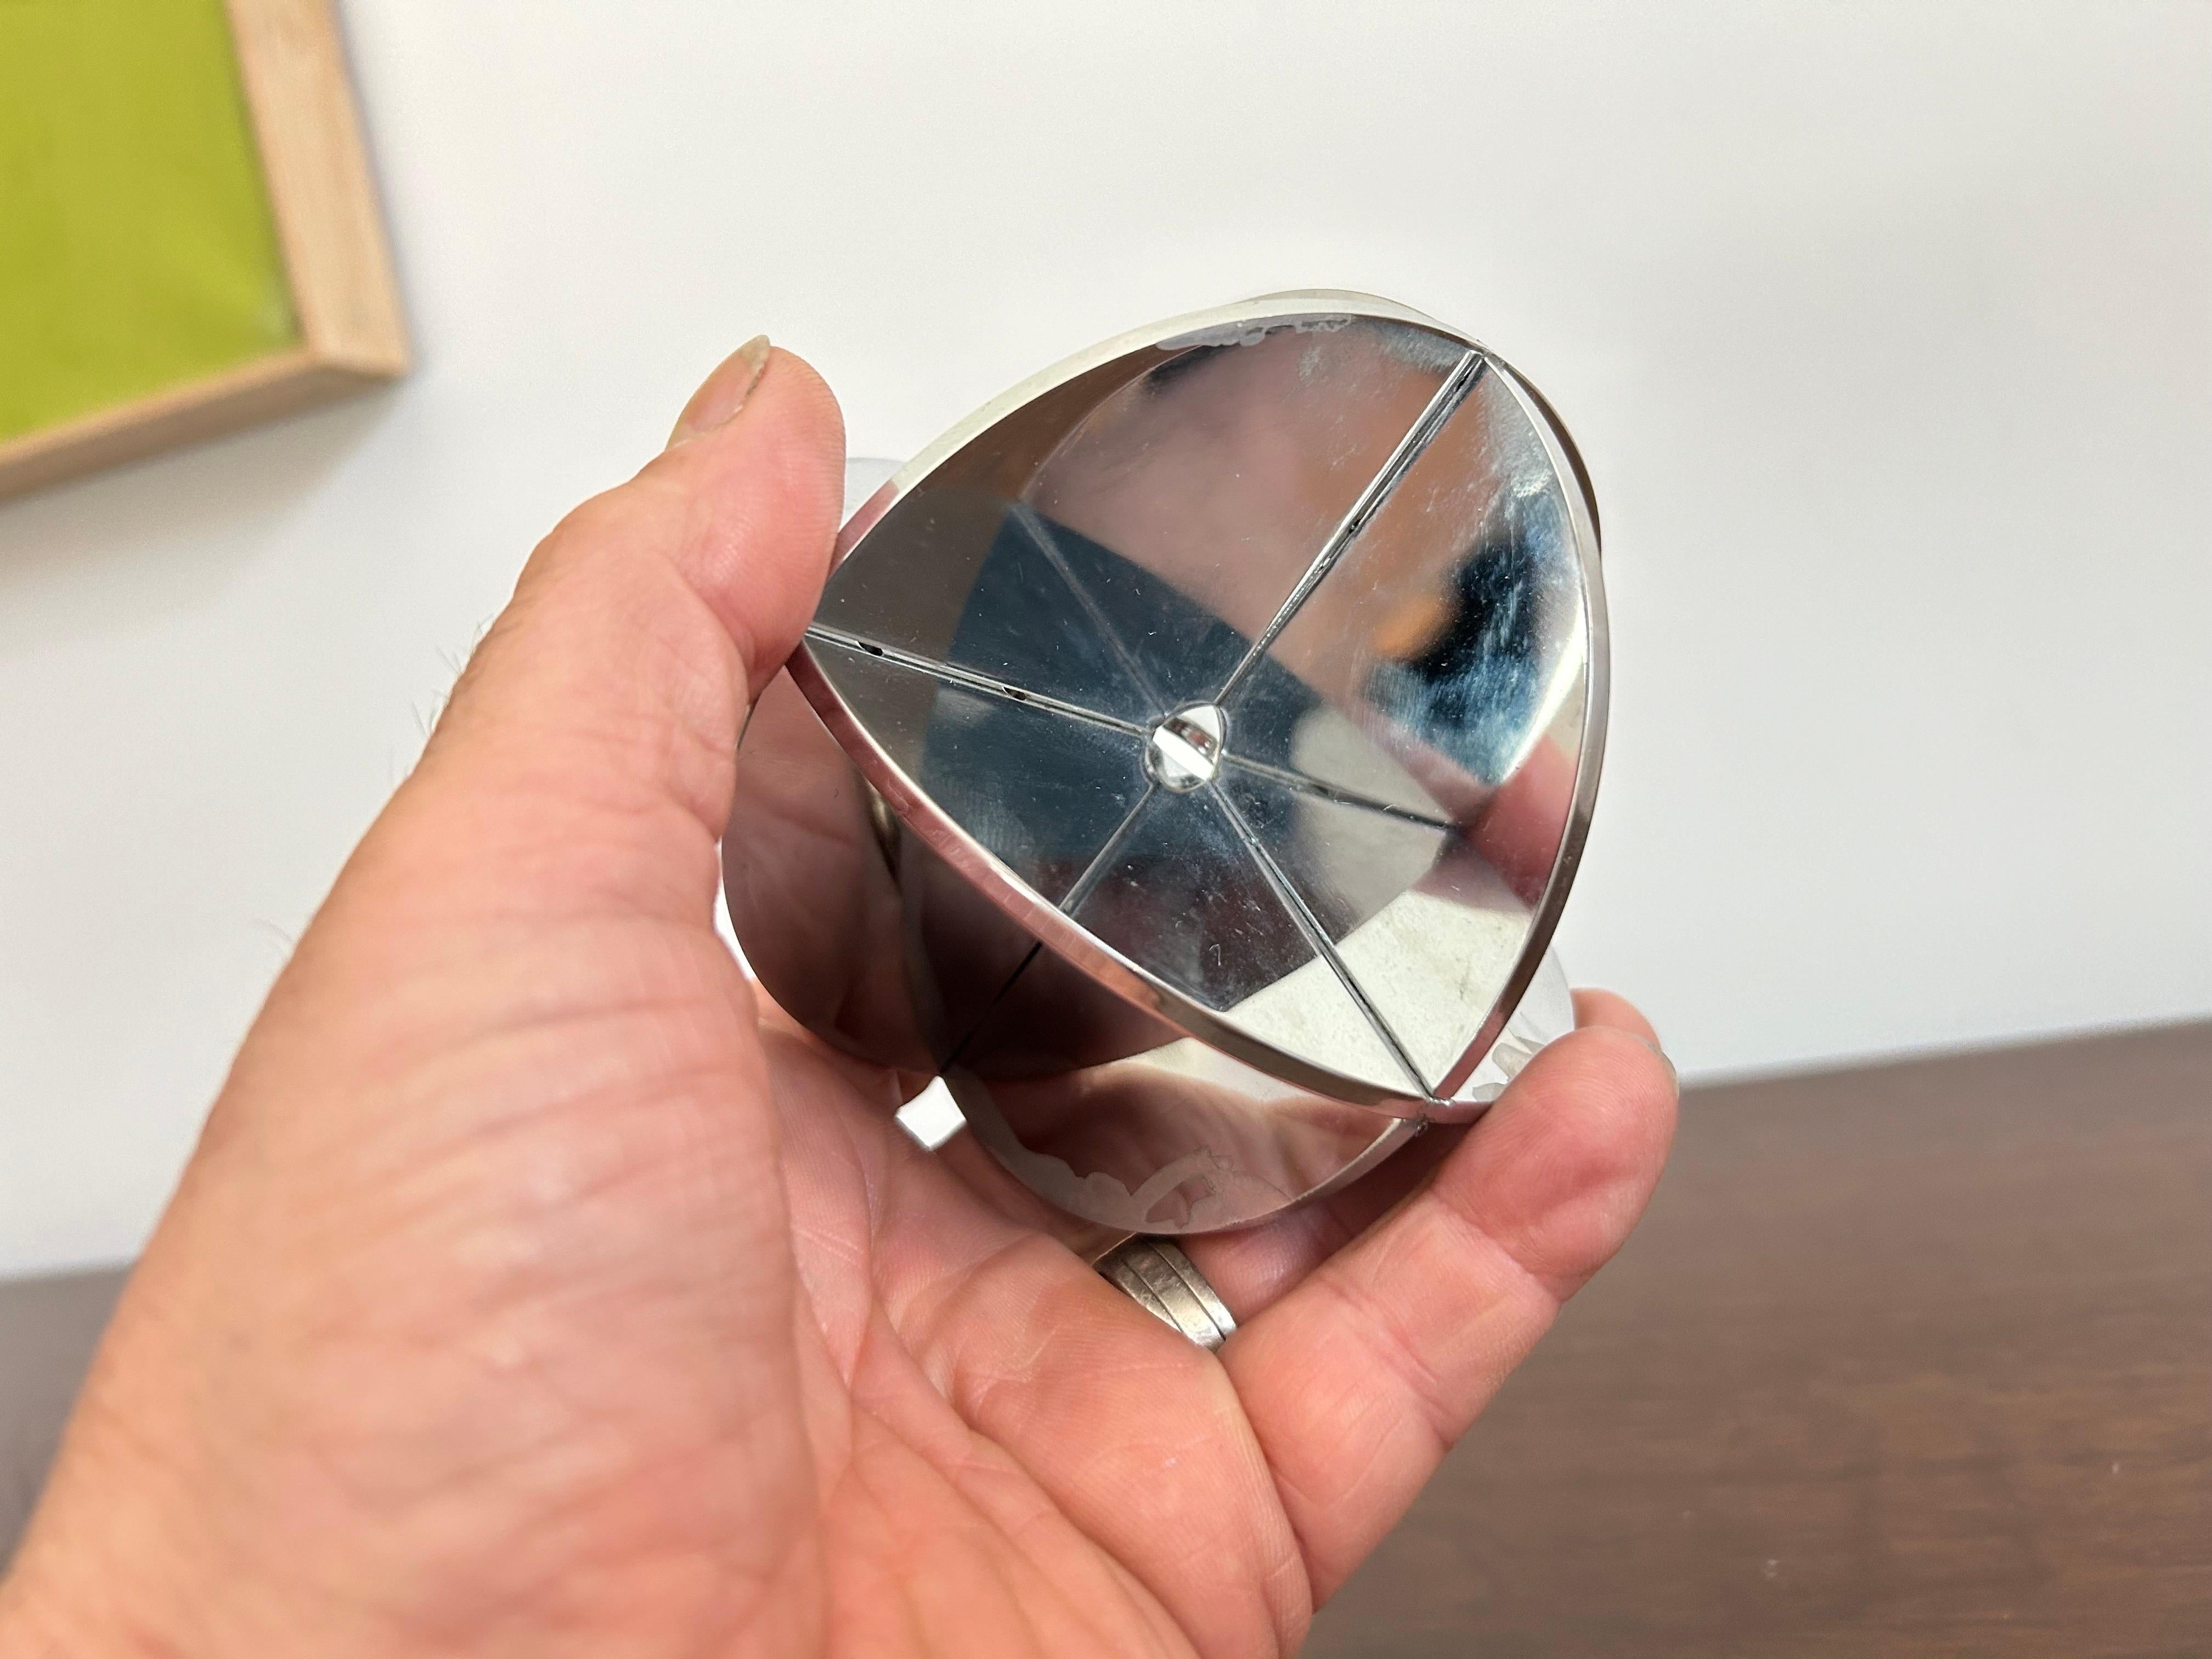 Nice modernist sculpture.  
Three chrome plated metal discs attached together creating an architectural sphere.. 
Great art object for a table-scape or display on a credenza… 